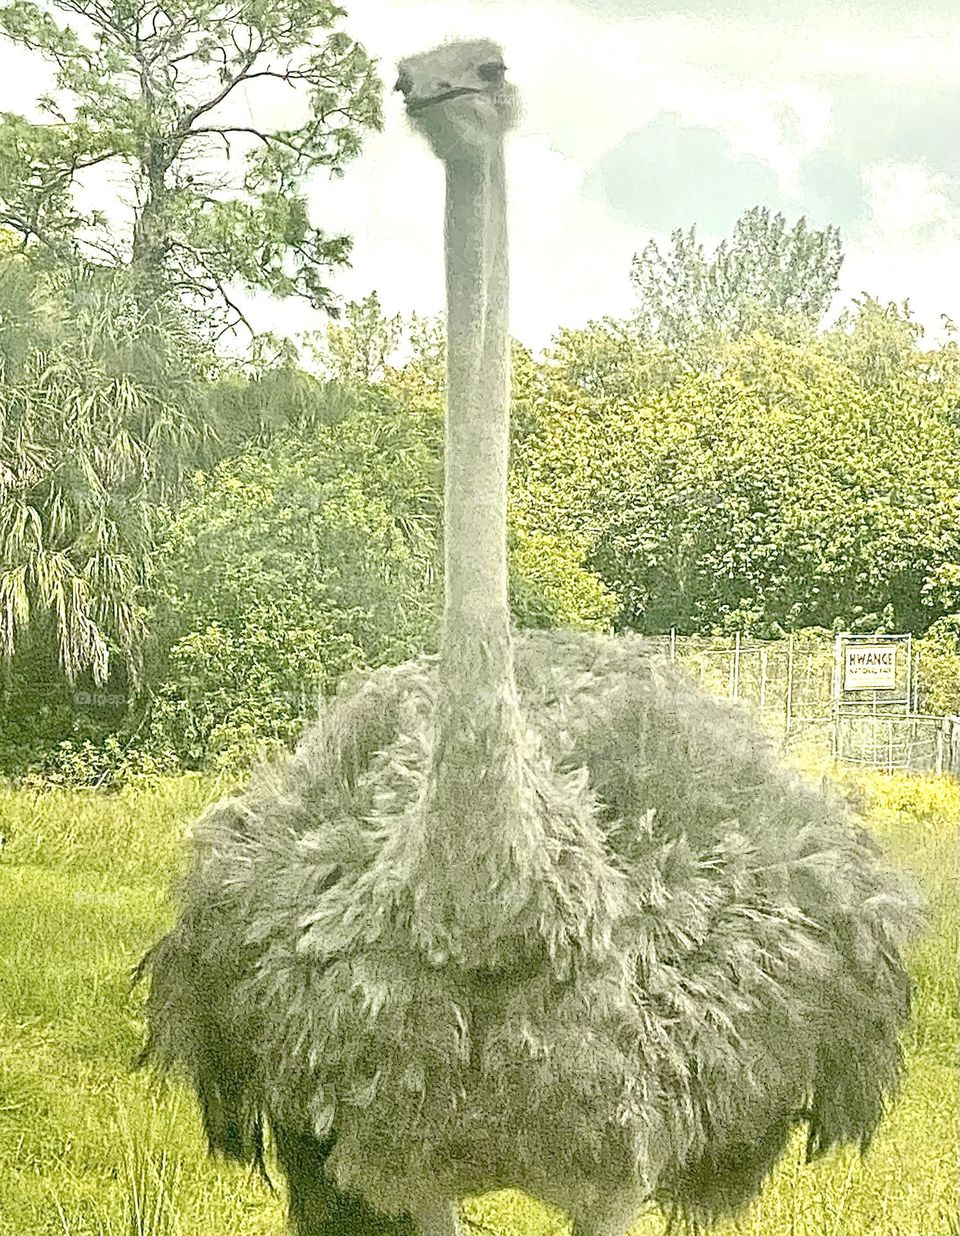 Ostriches can be friendly too